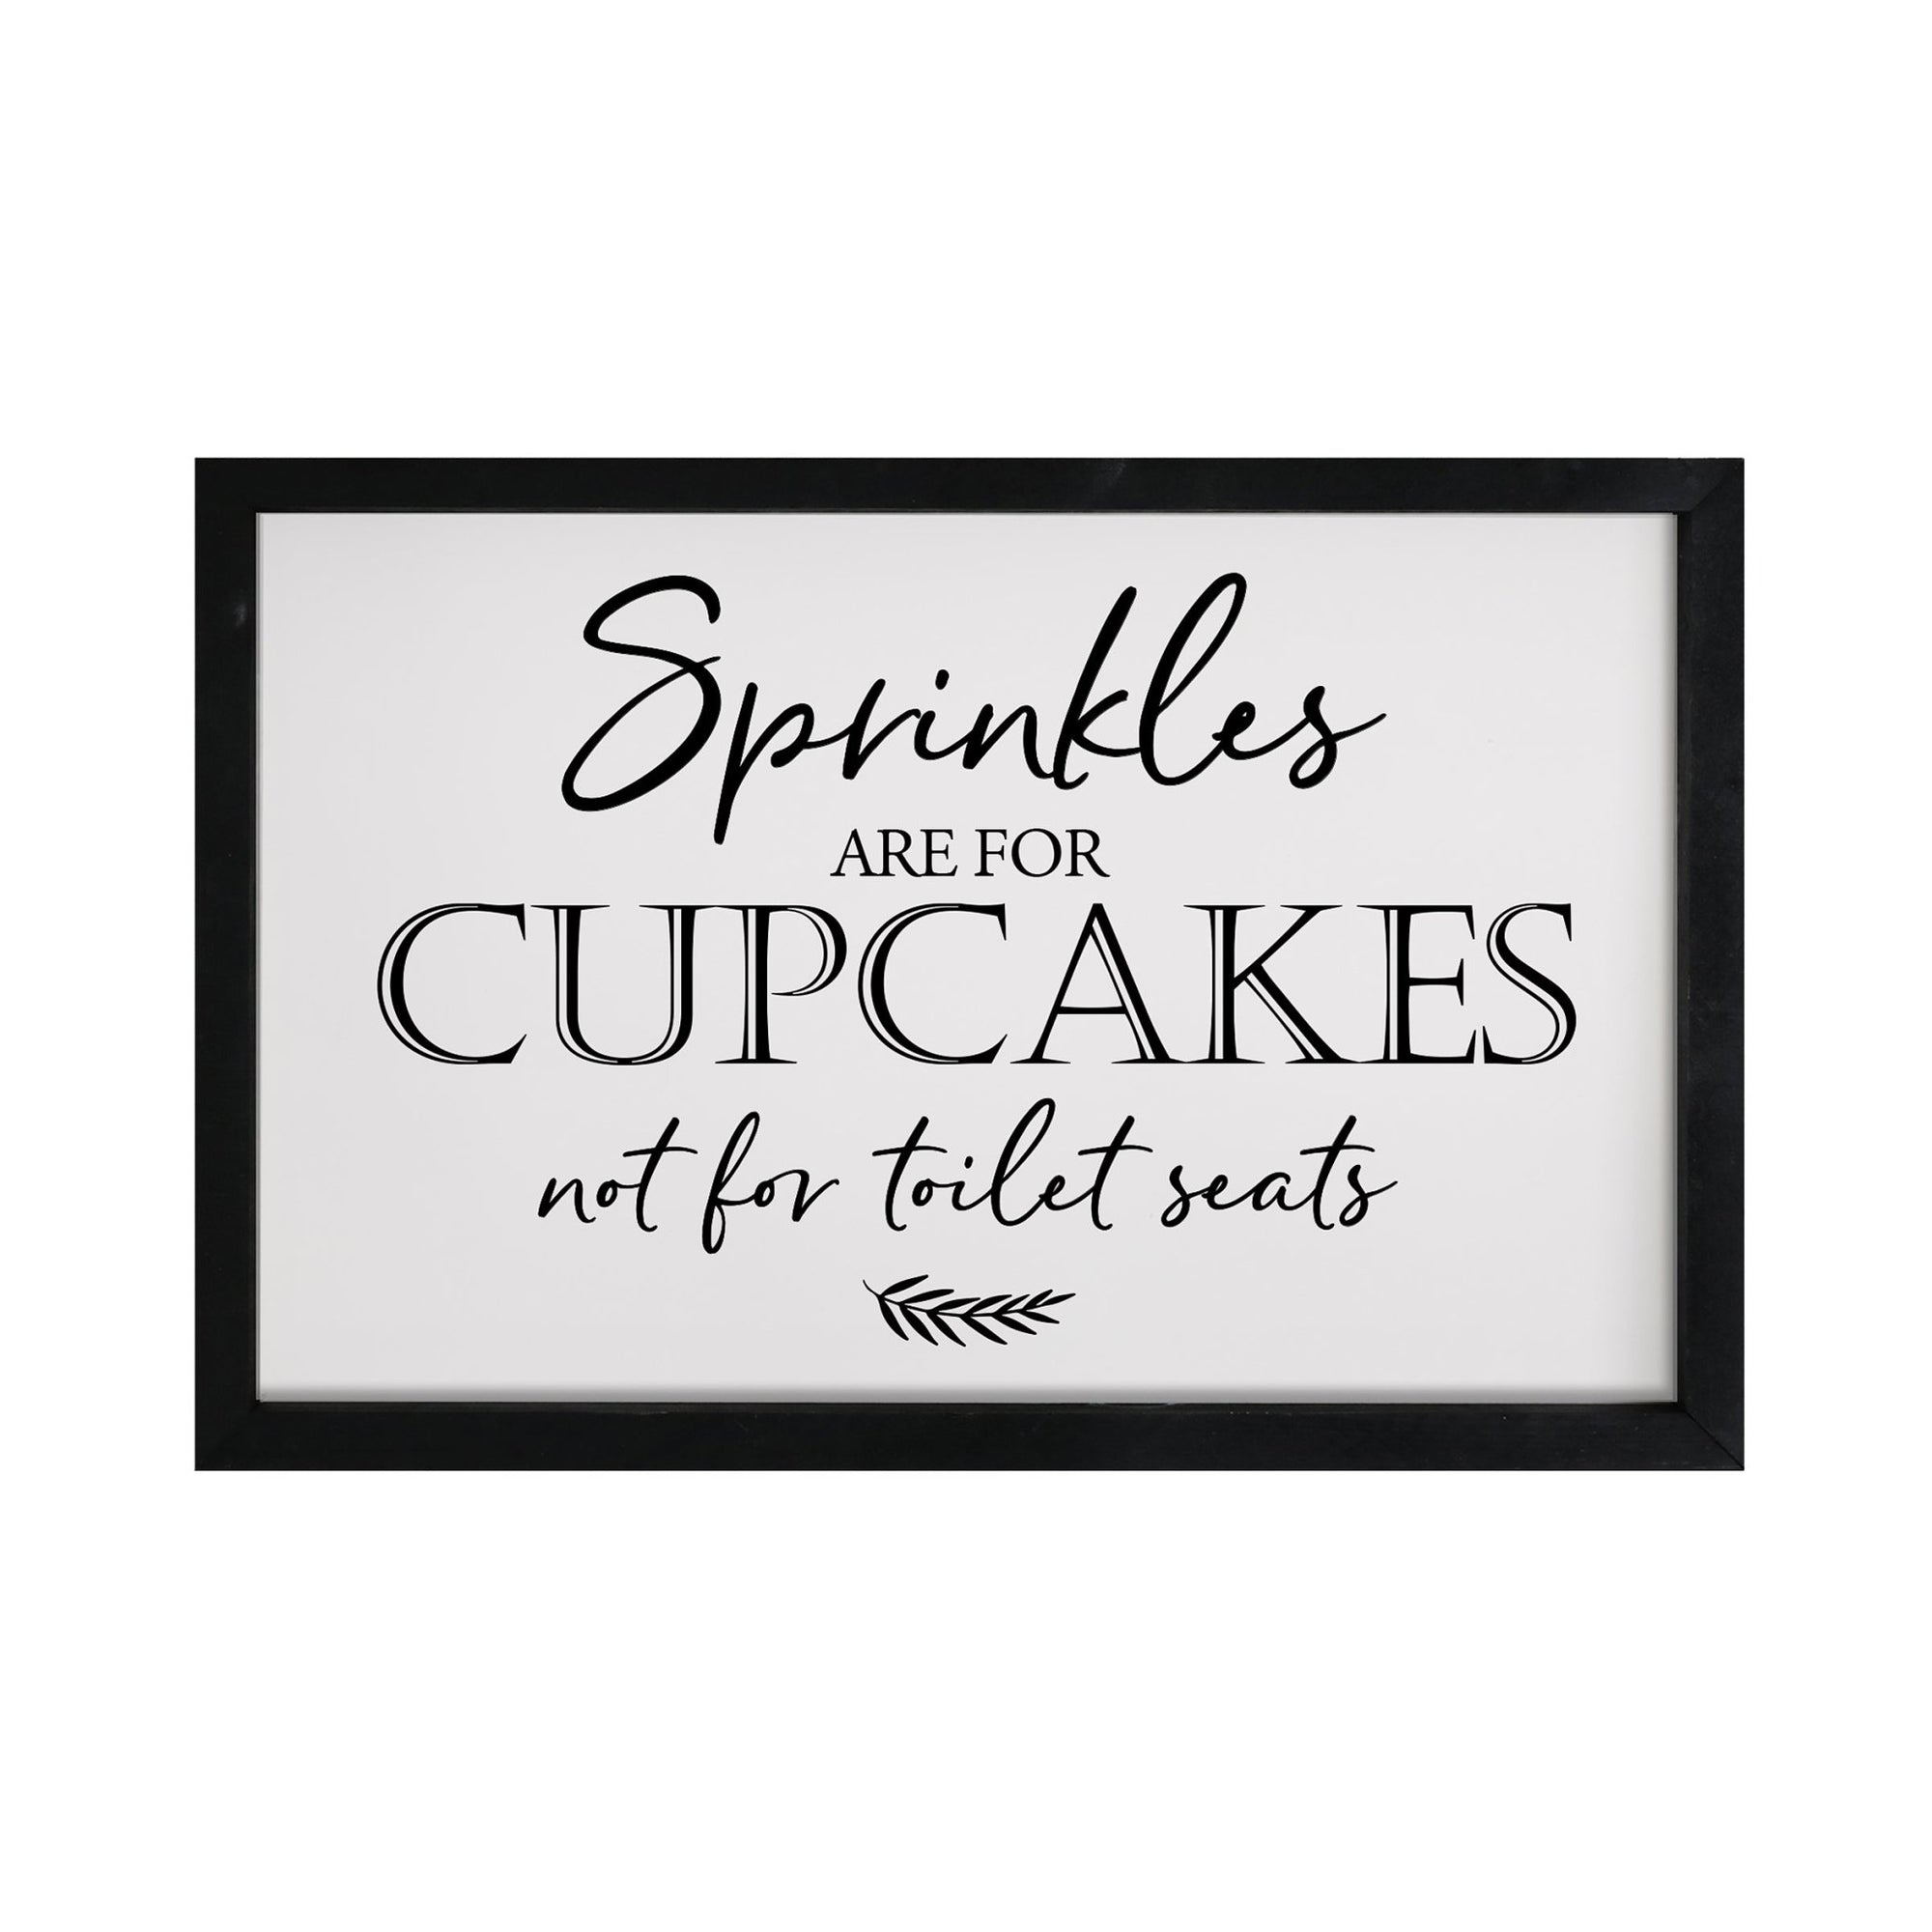 Funny Bathroom Decor Framed Shadow Box 7x10in (Sprinkles Are For Cupcakes) - LifeSong Milestones